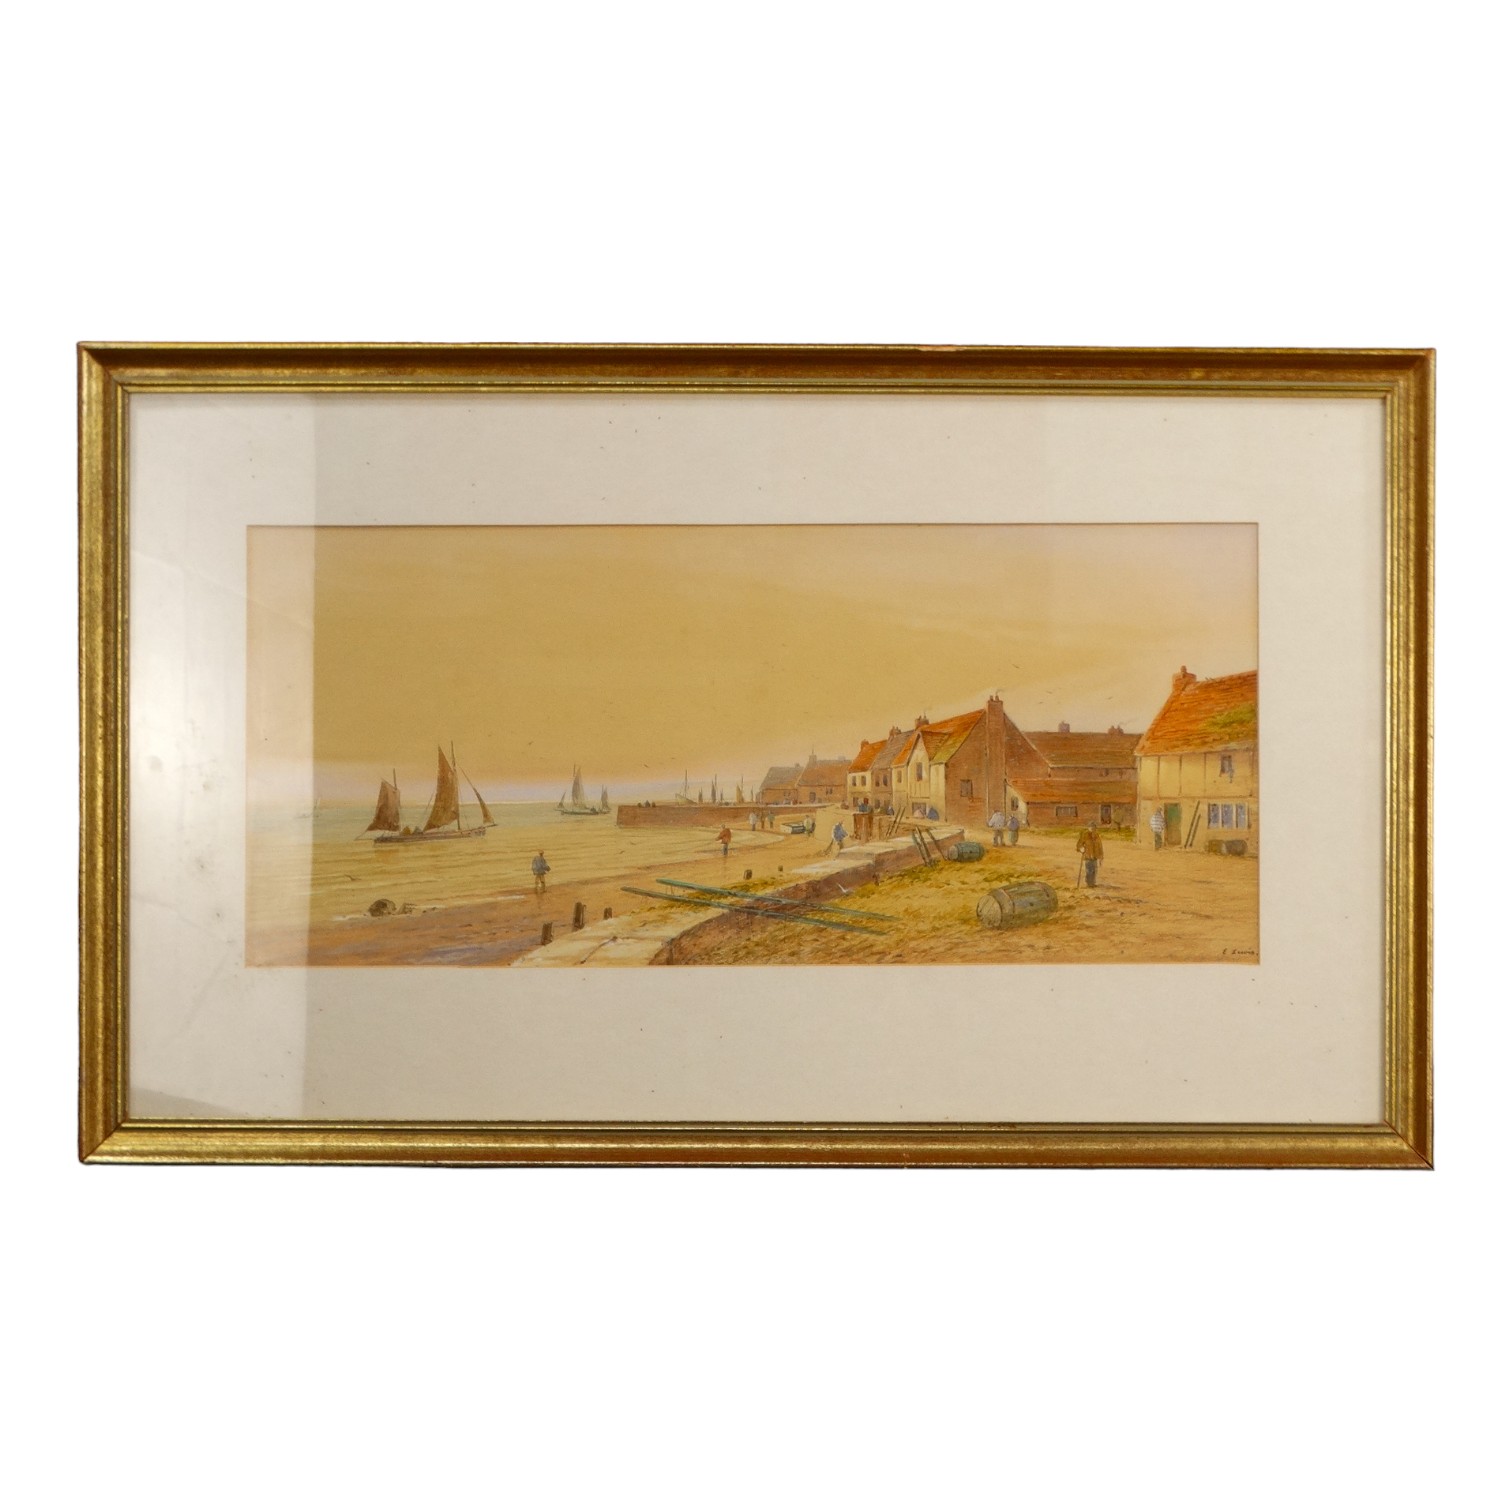 E. LEWIS (19th/20th Century) Rue Quai Henri IV Dieppe Watercolour Signed lower right, inscribed with - Image 6 of 8